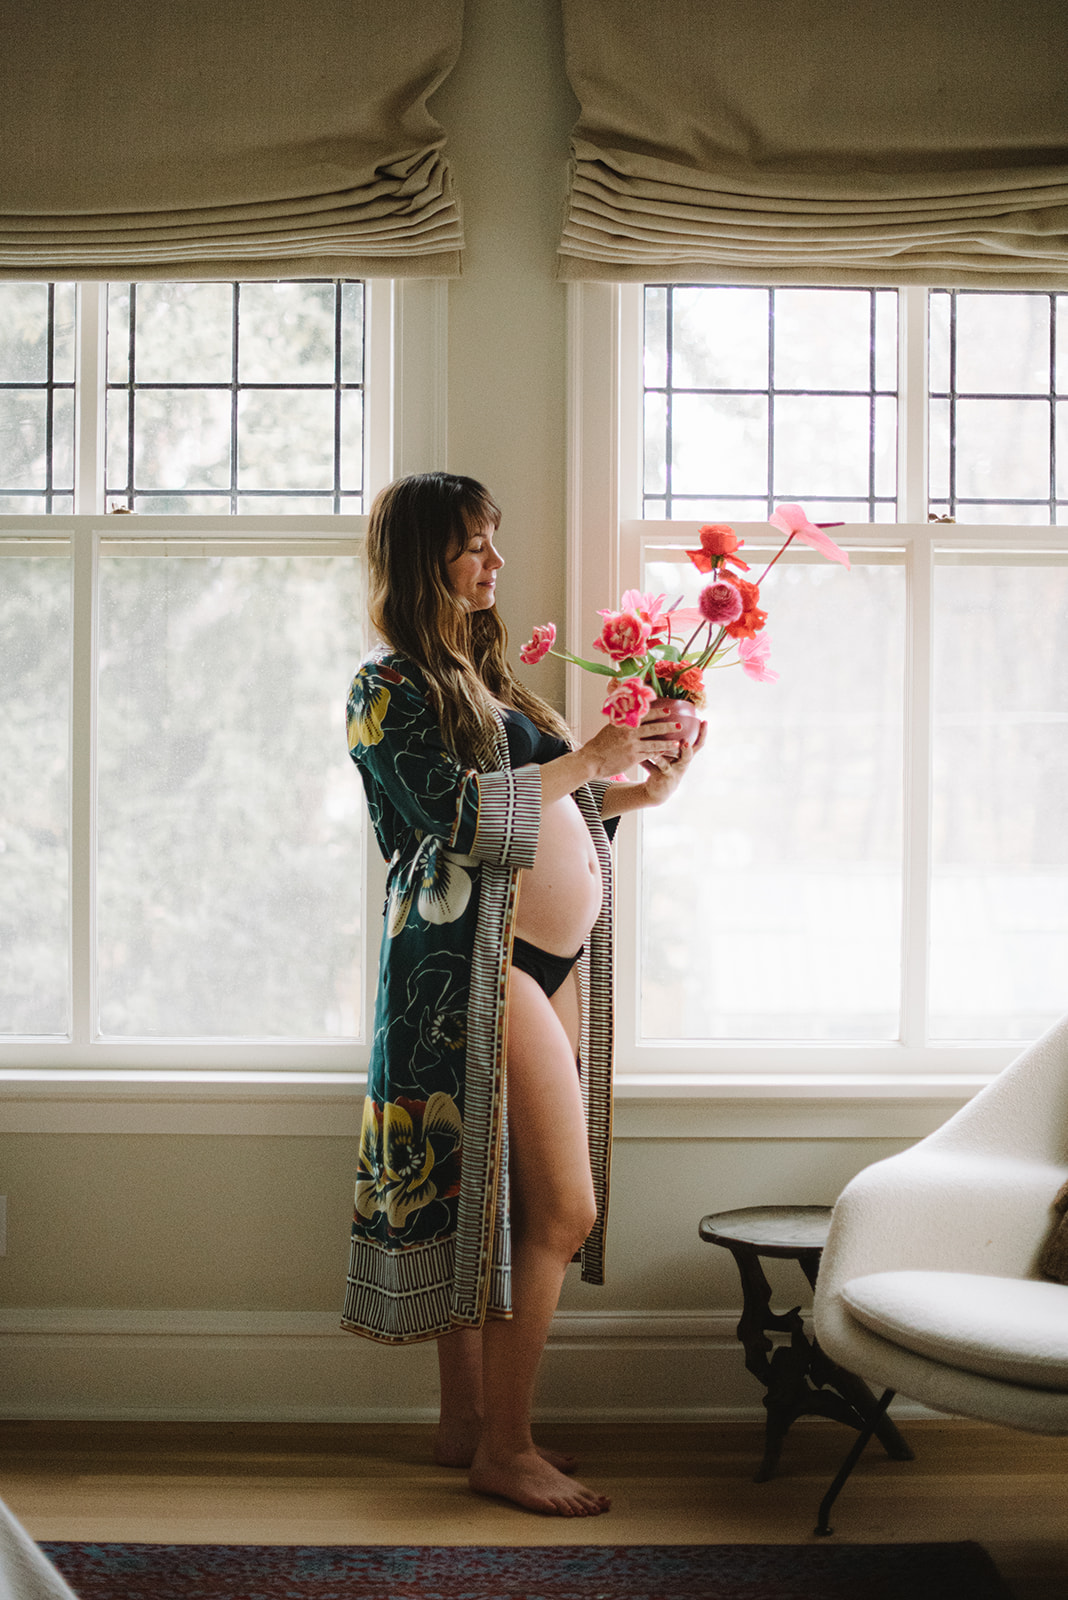 pregnant woman wearing only a robe standing in a window holding a bouquet of pink flowers